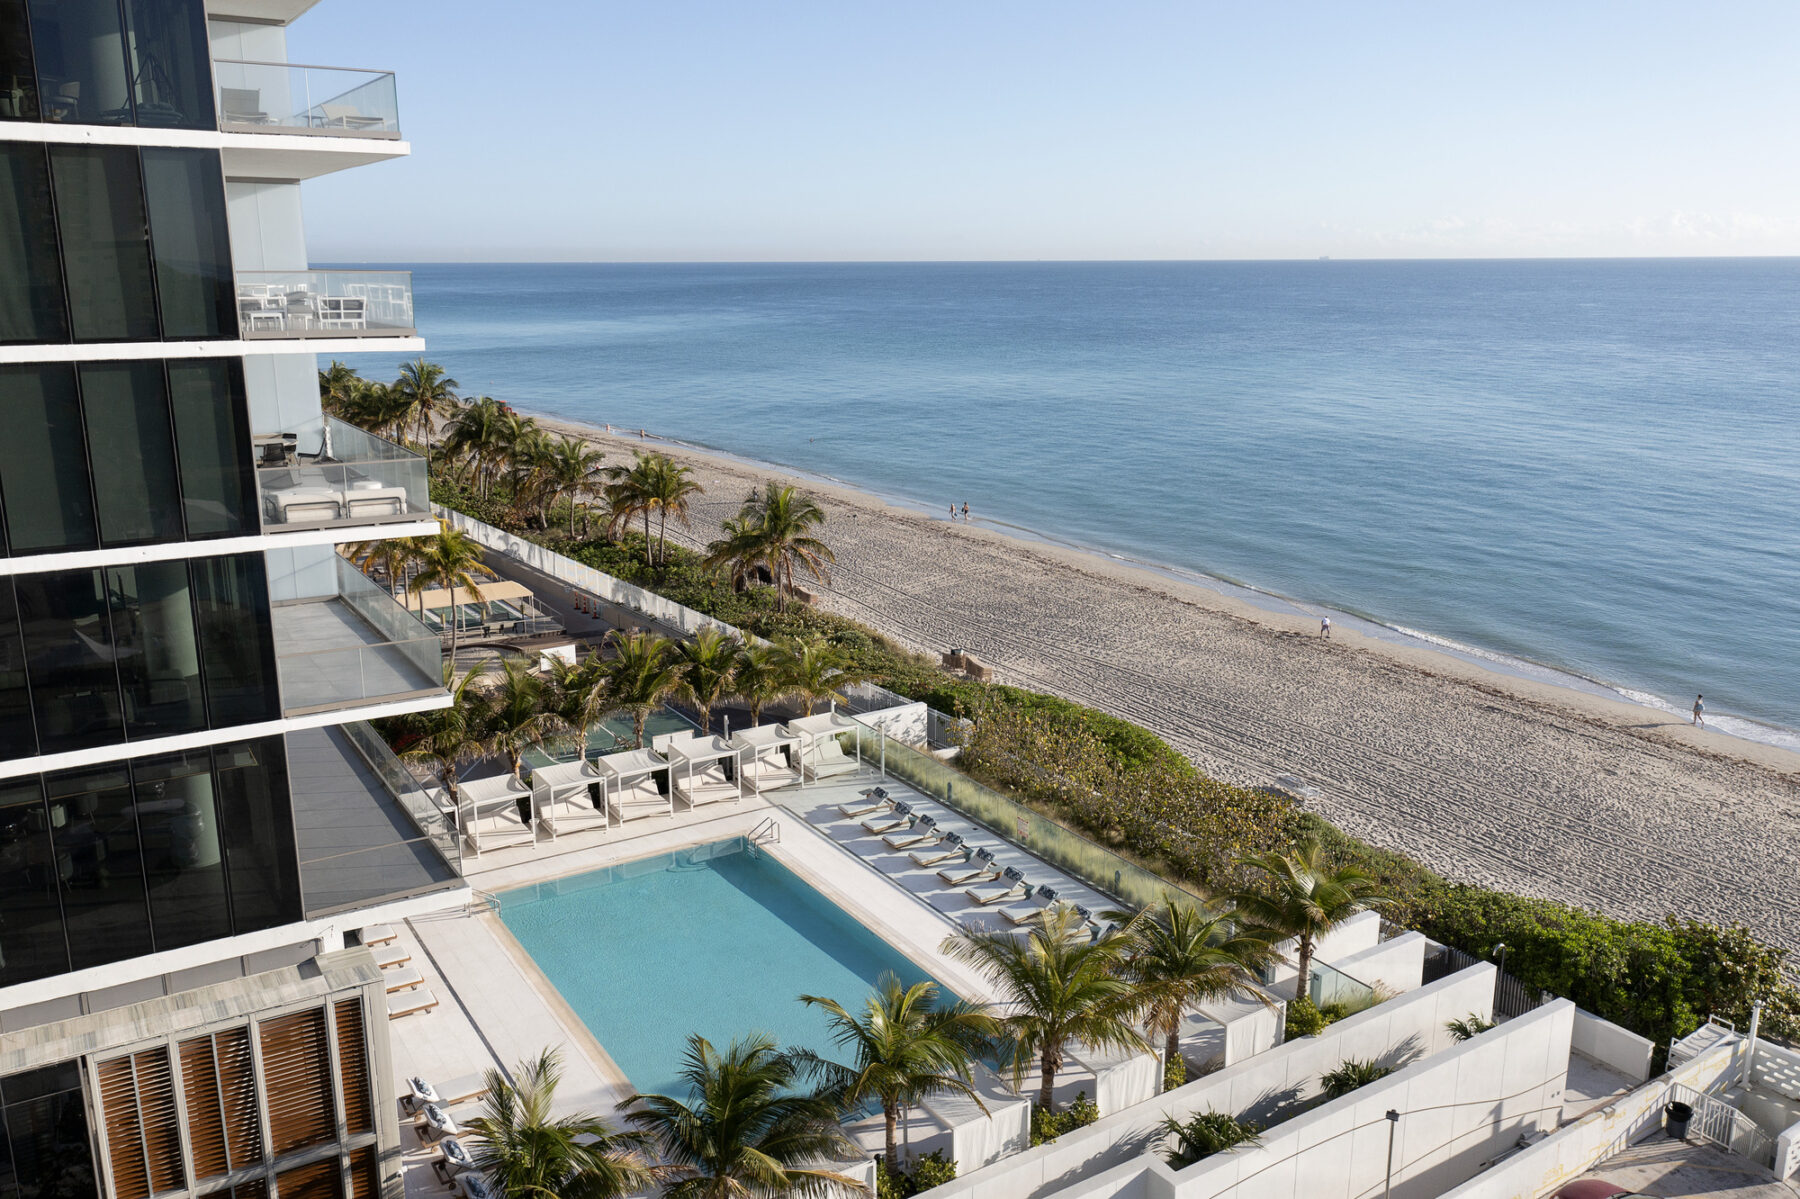 Perspective shot of 2000 Ocean Hallandale featuring pool area with tropical plantings